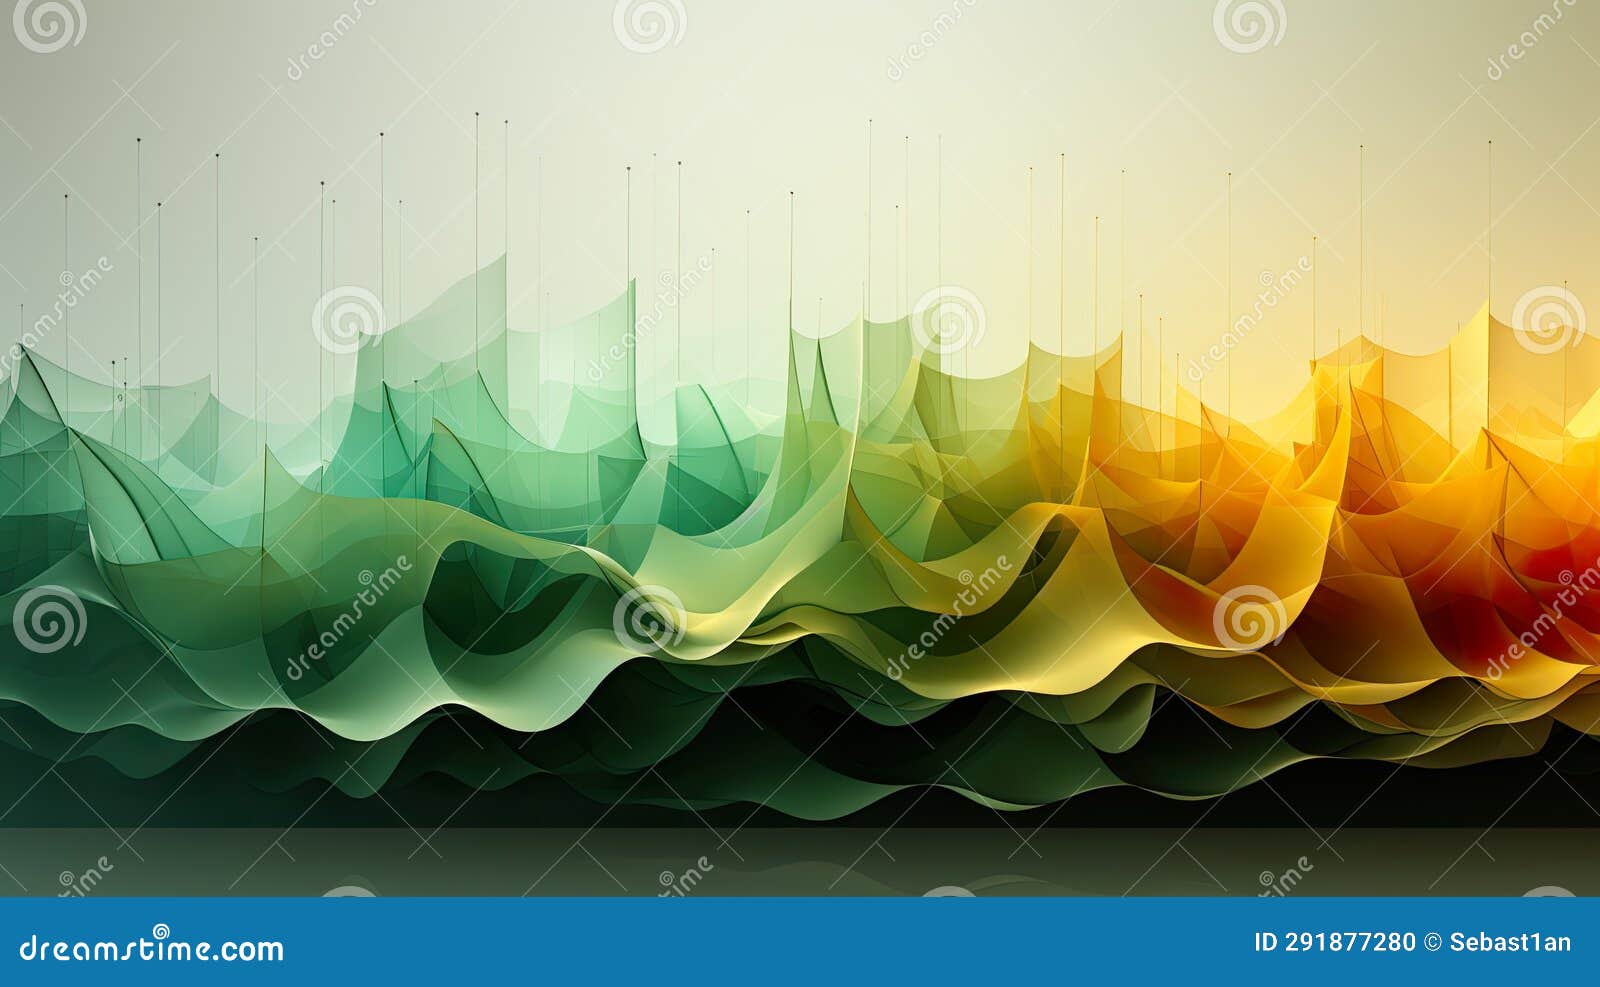 dynamic world of technology with this captivating wavy background infused with tech aesthetics.